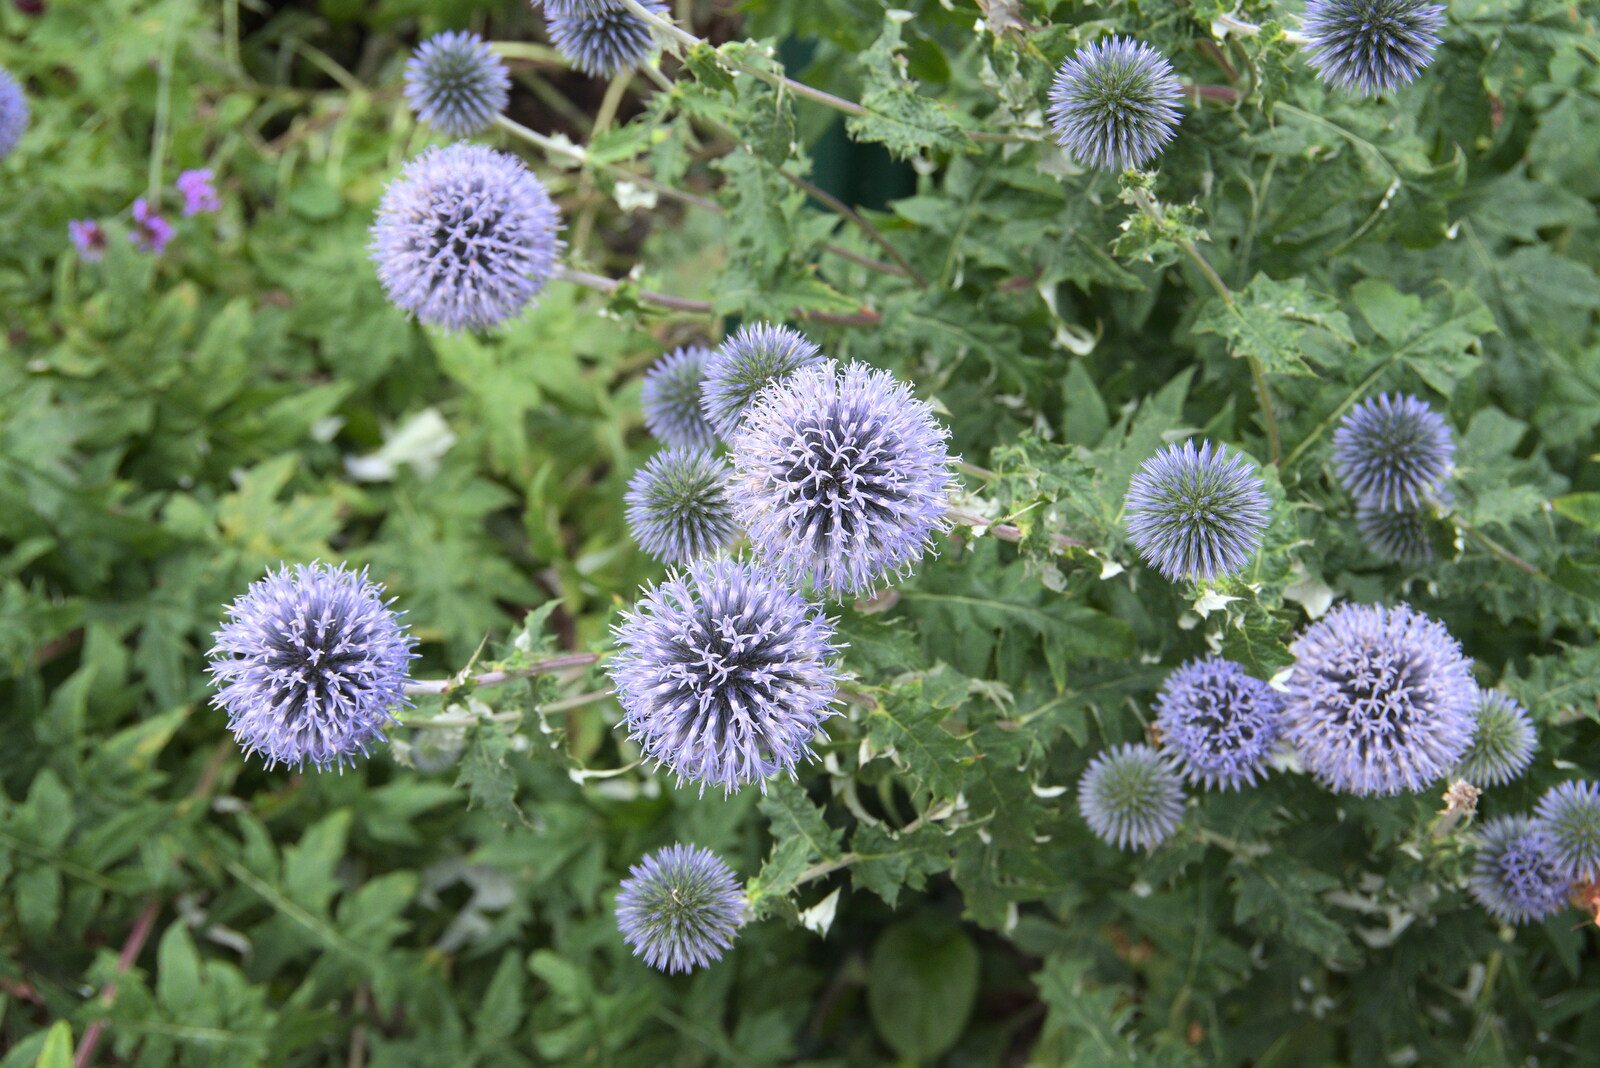 Cool spiky blue flowers from Pork Pies and Dockside Dereliction, Melton Mowbray and Liverpool - 7th August 2021